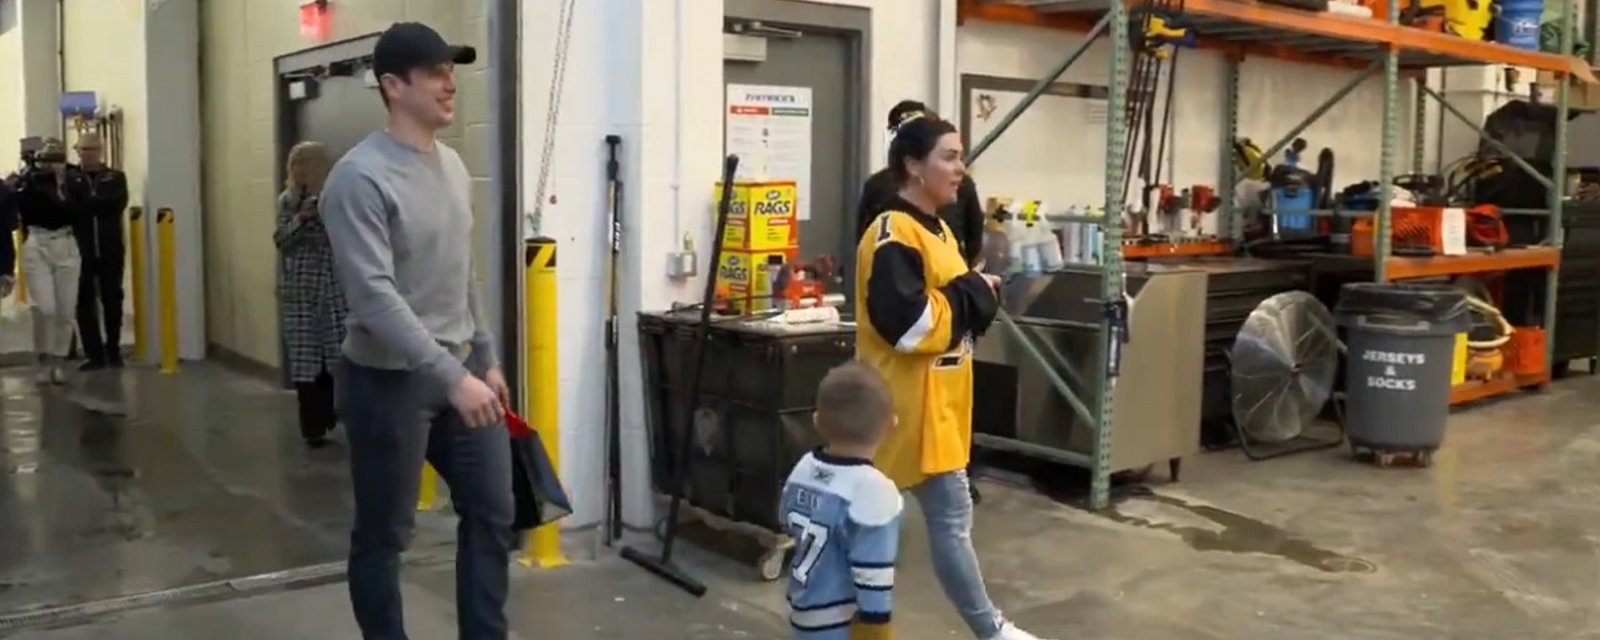 Sidney Crosby gives amazing gift to US Army veteran and her child just before the holidays!